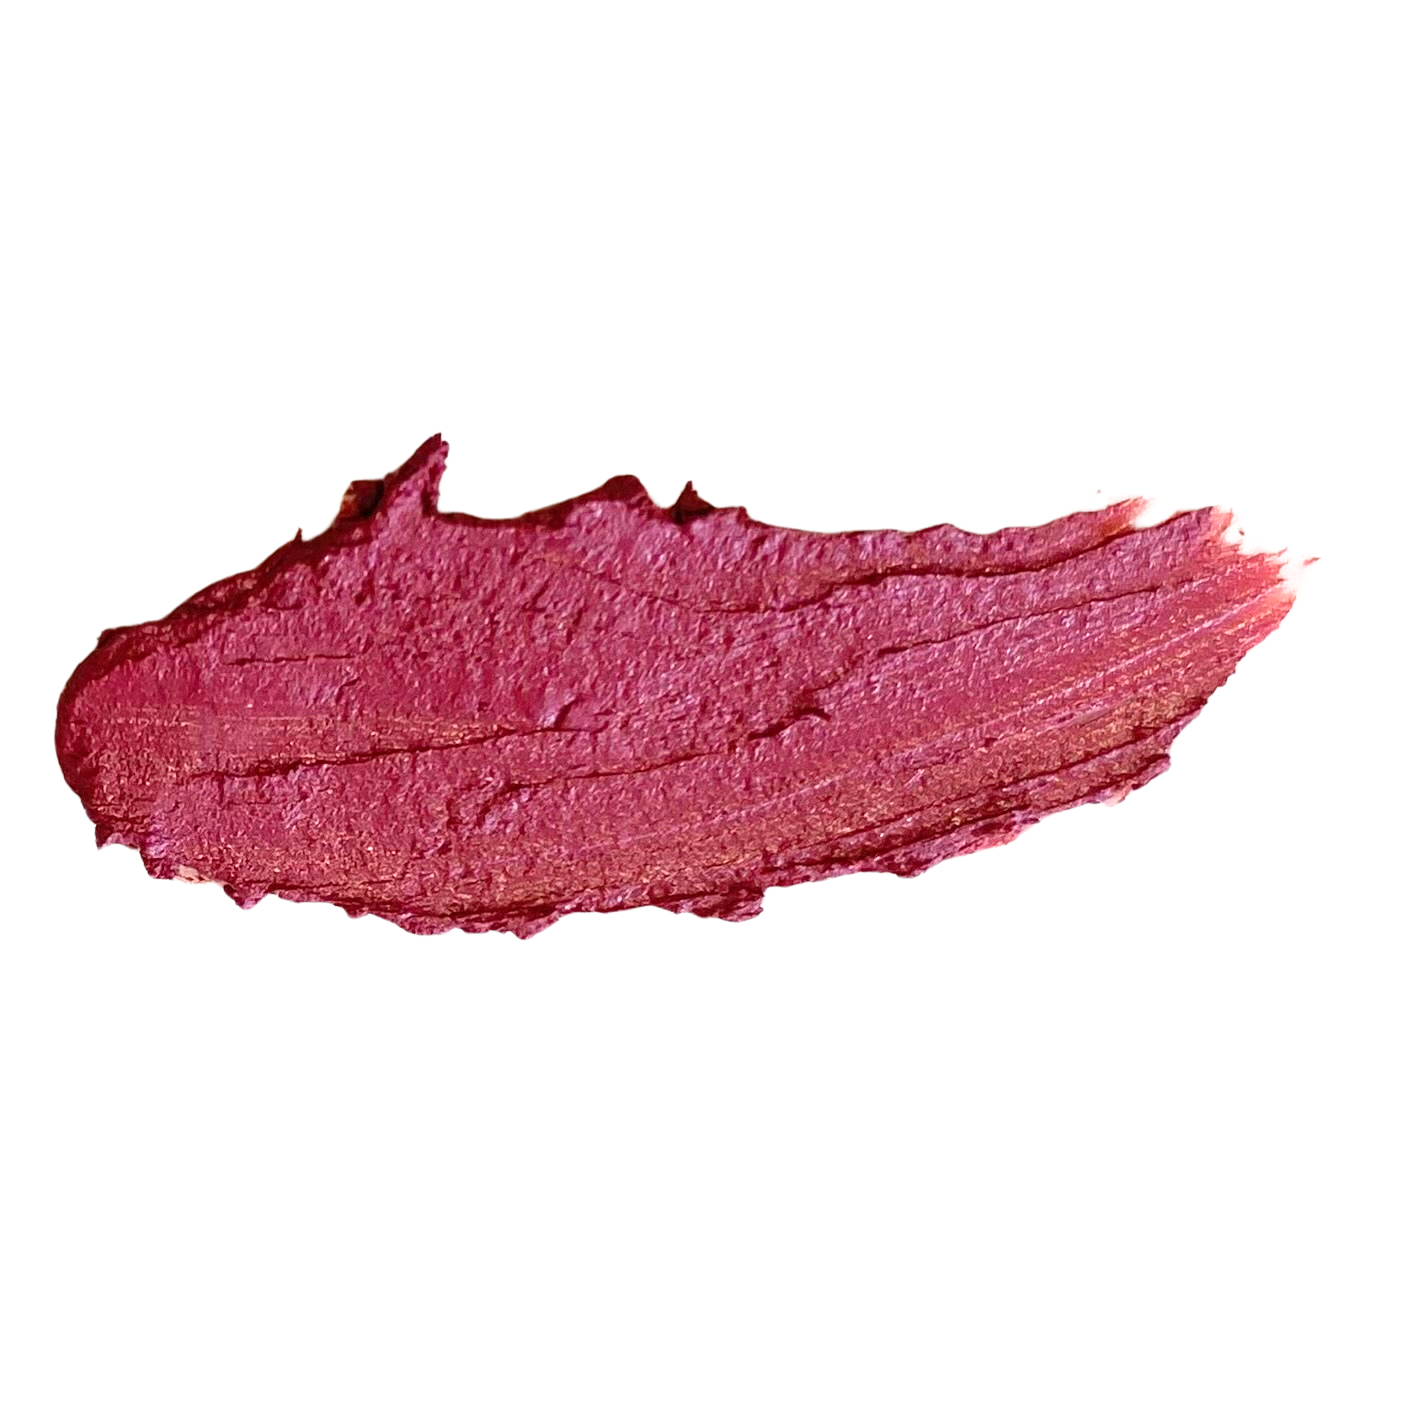 ethereal lipstick deep rosy pink smear on white background 